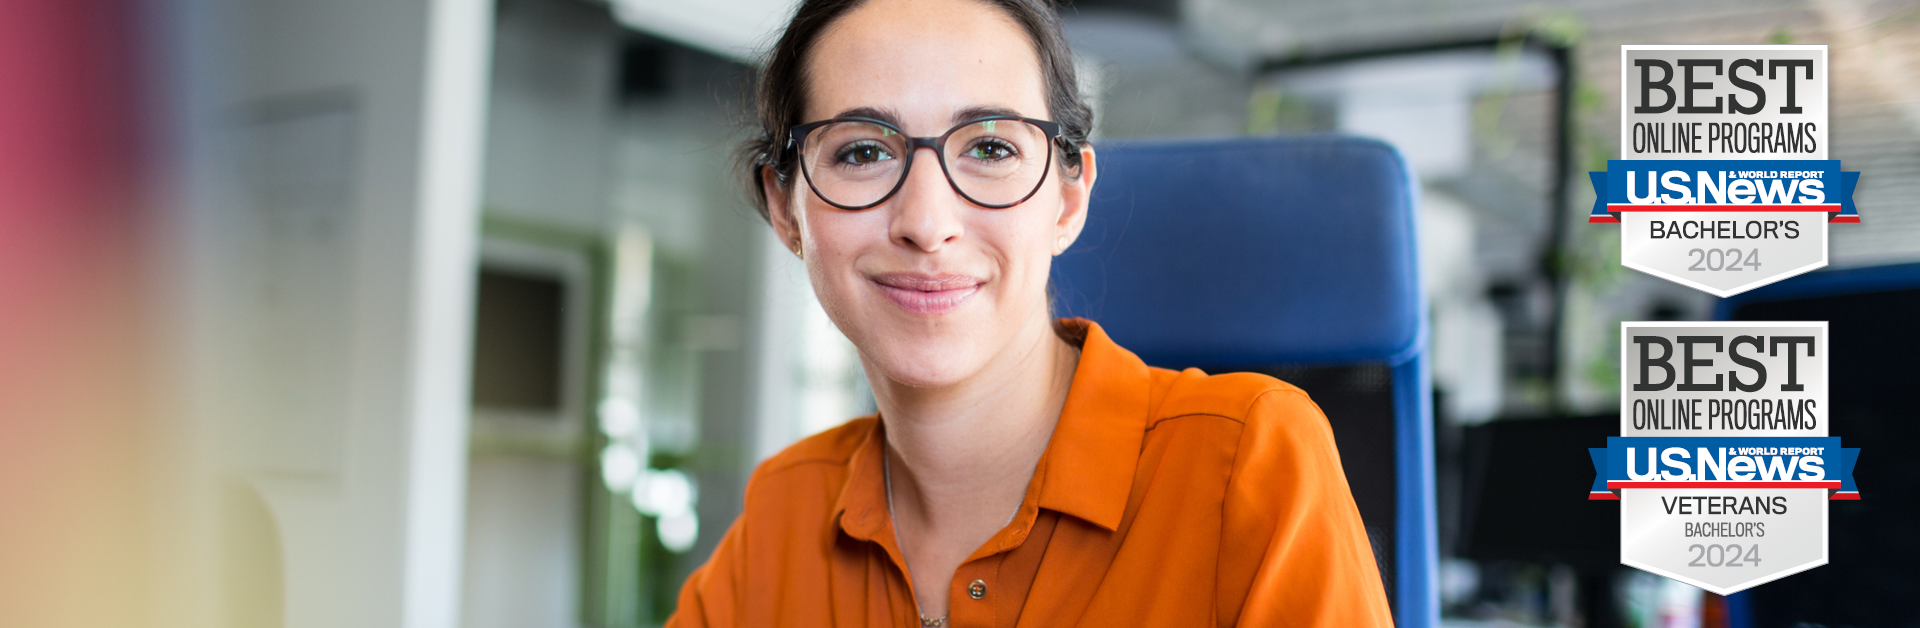 a white woman with brown hair wearing glasses and an orange shirt sitting in an office chair